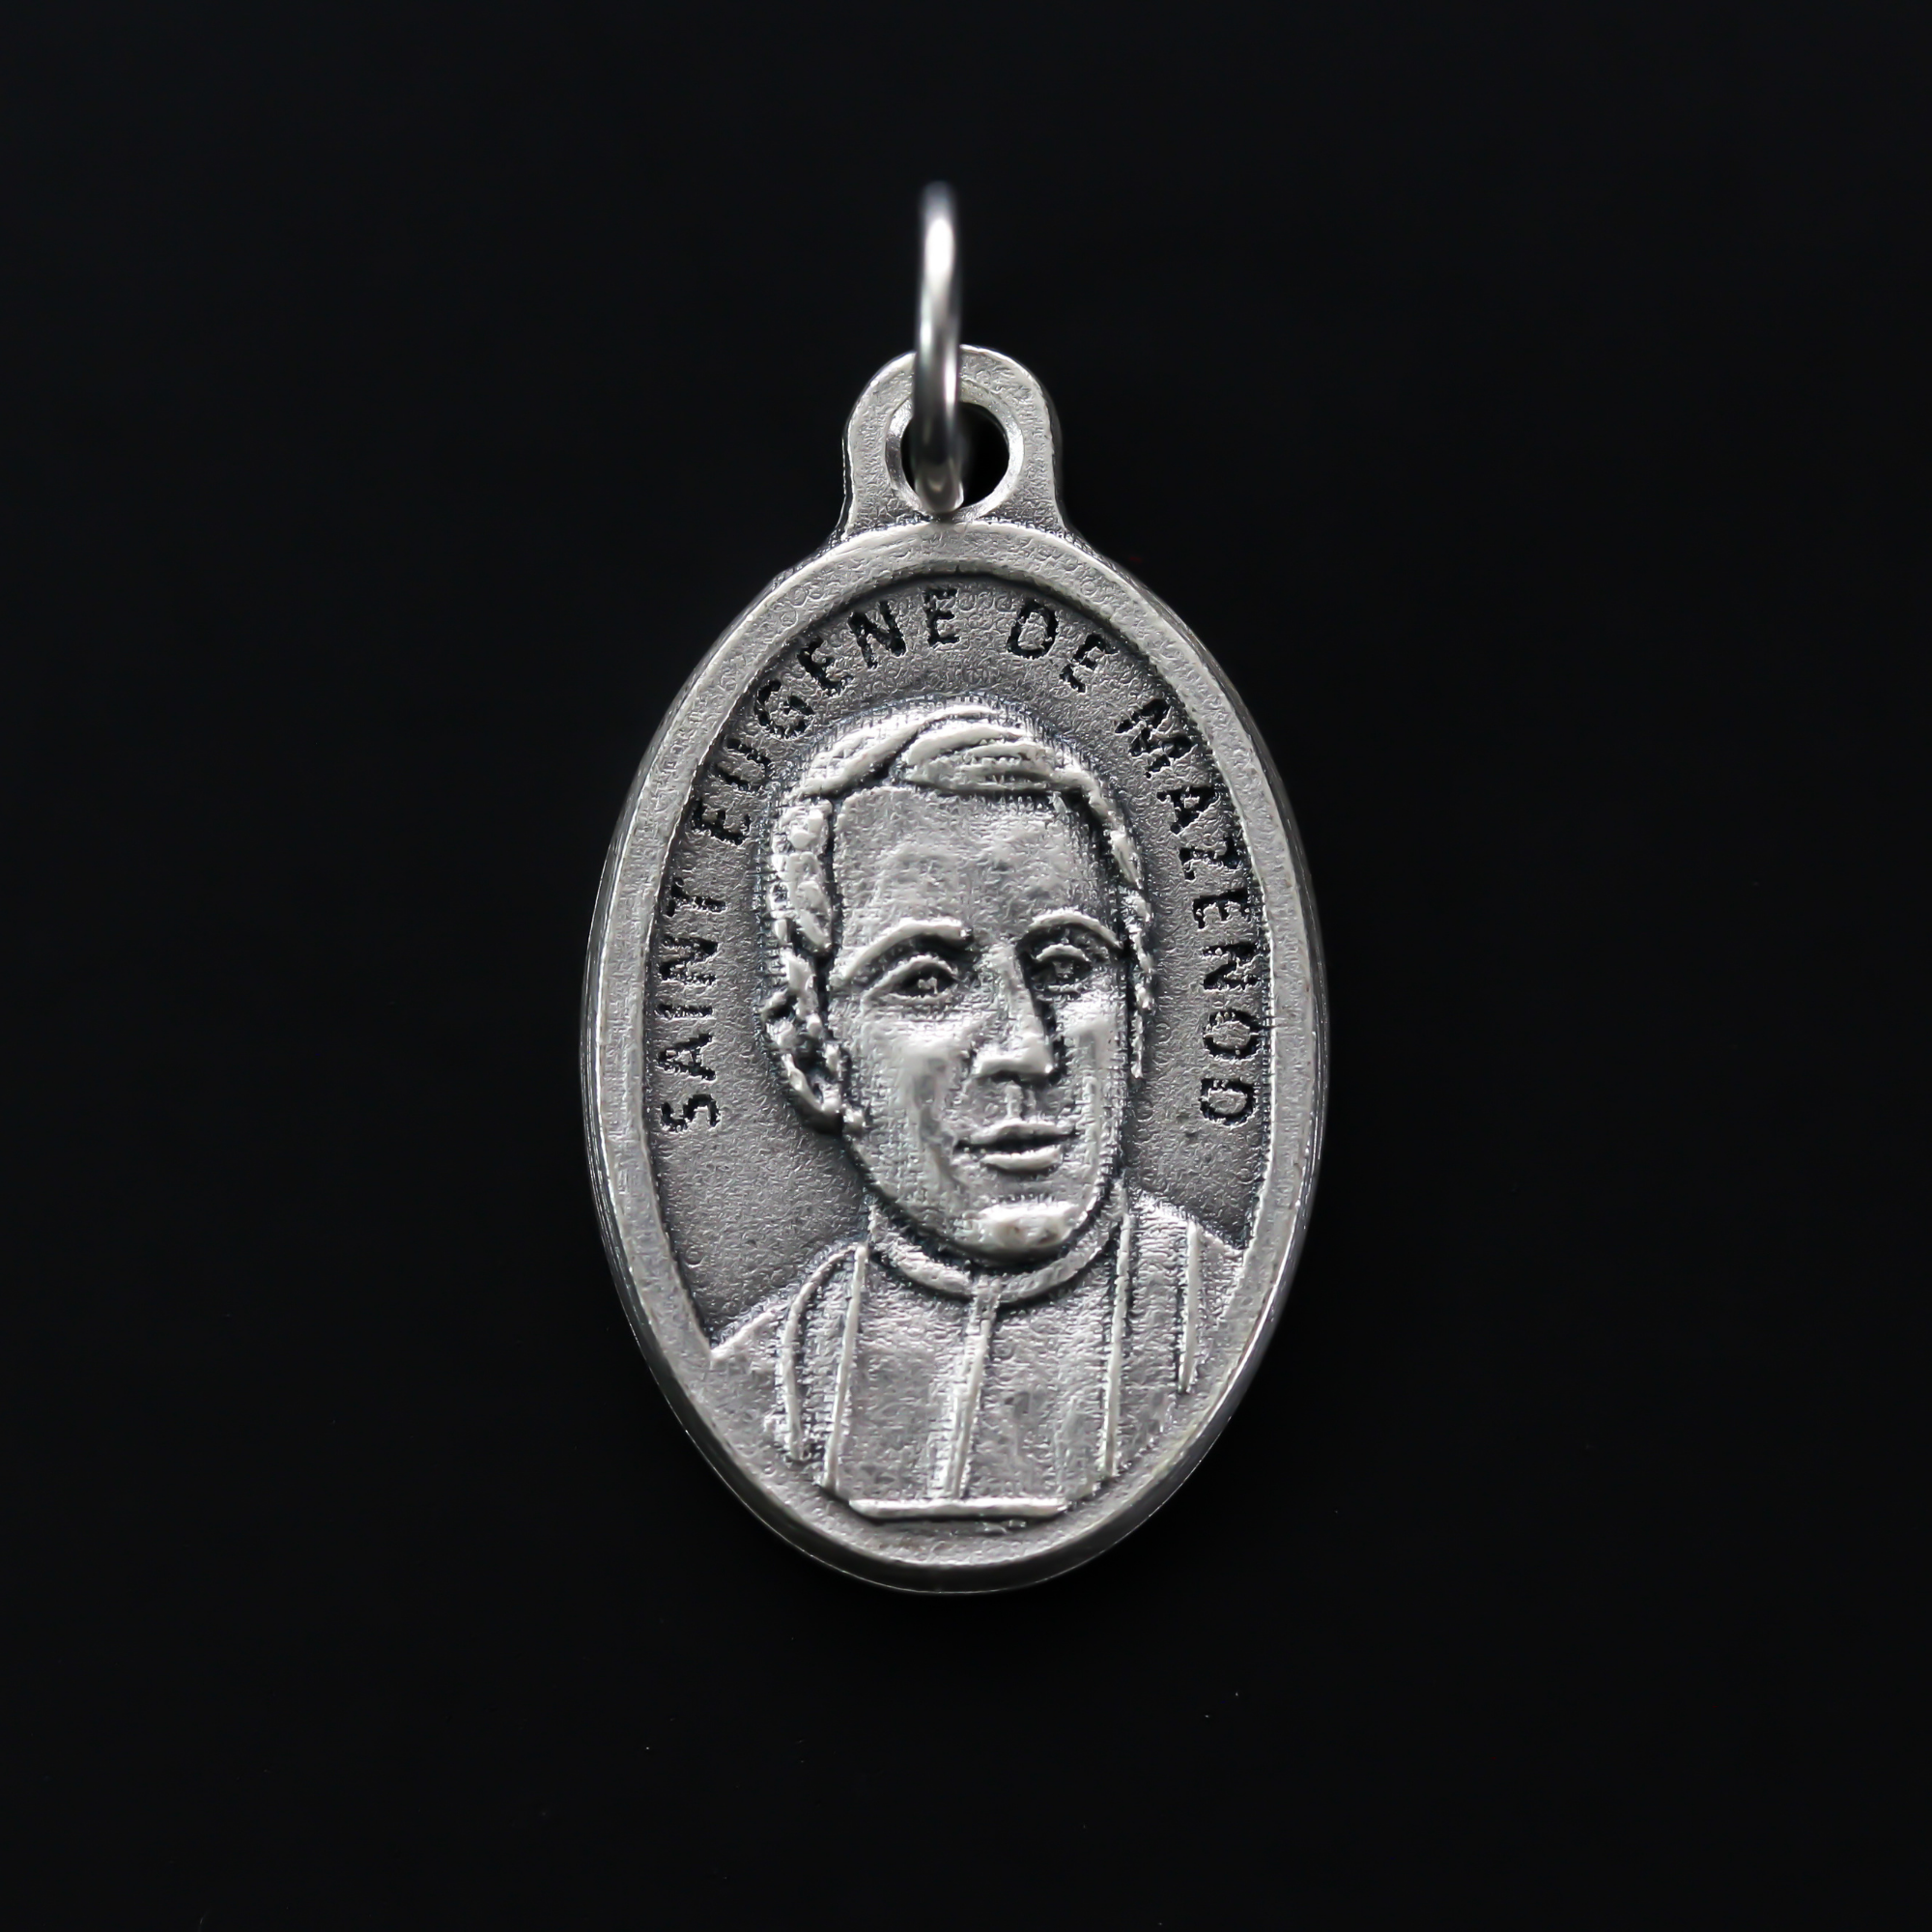 Saint Eugène de Mazenod medal that depicts the saint on the front and "Pray For Us" on the backside.